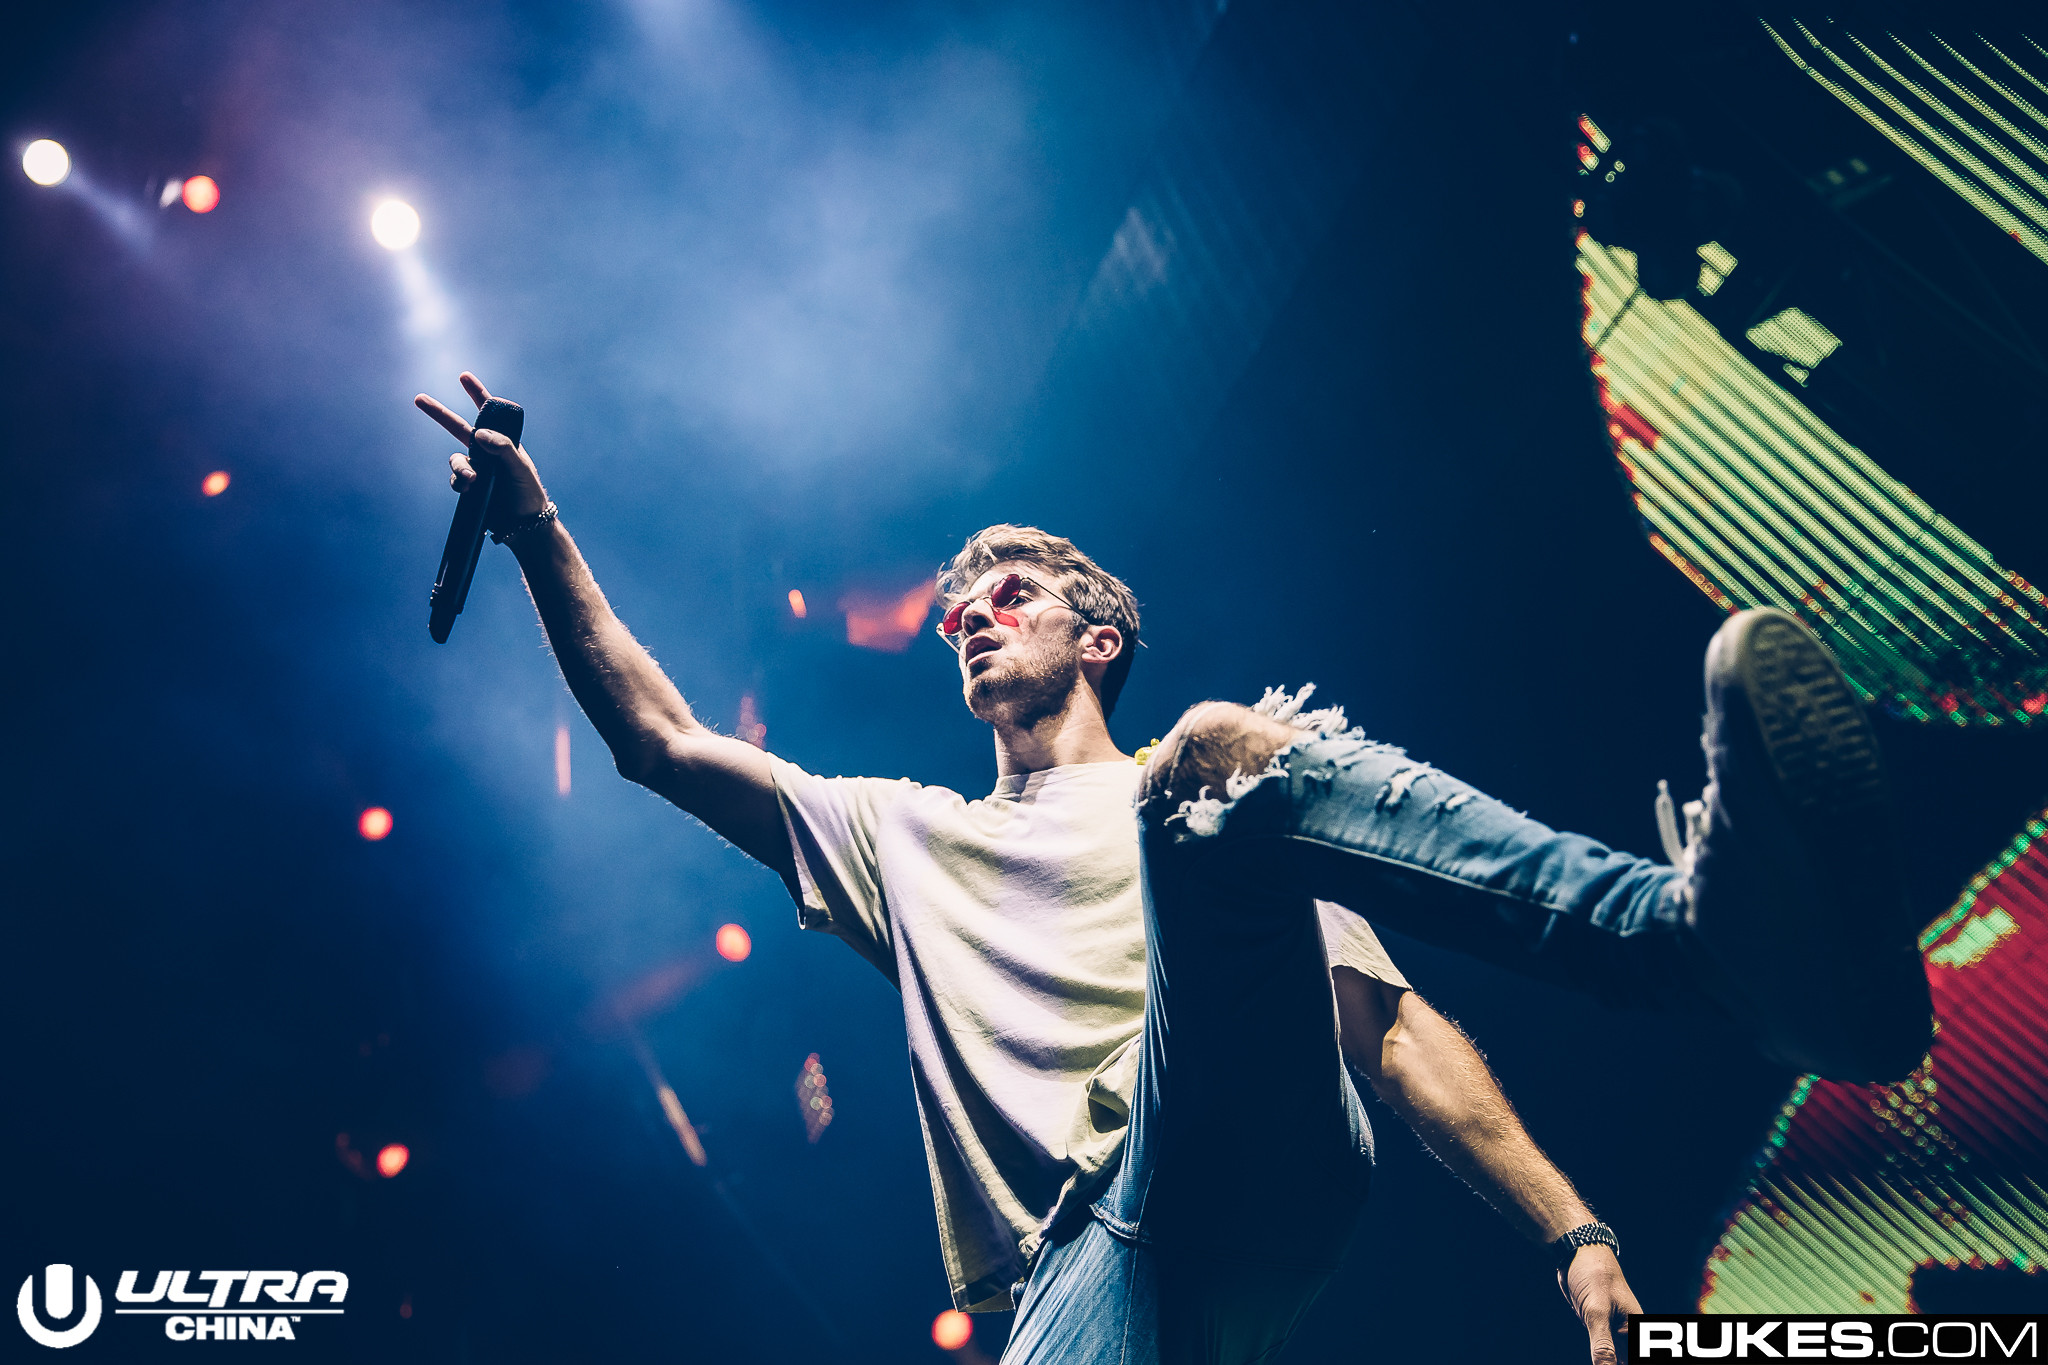 The Chainsmokers at Hollywood Palladium